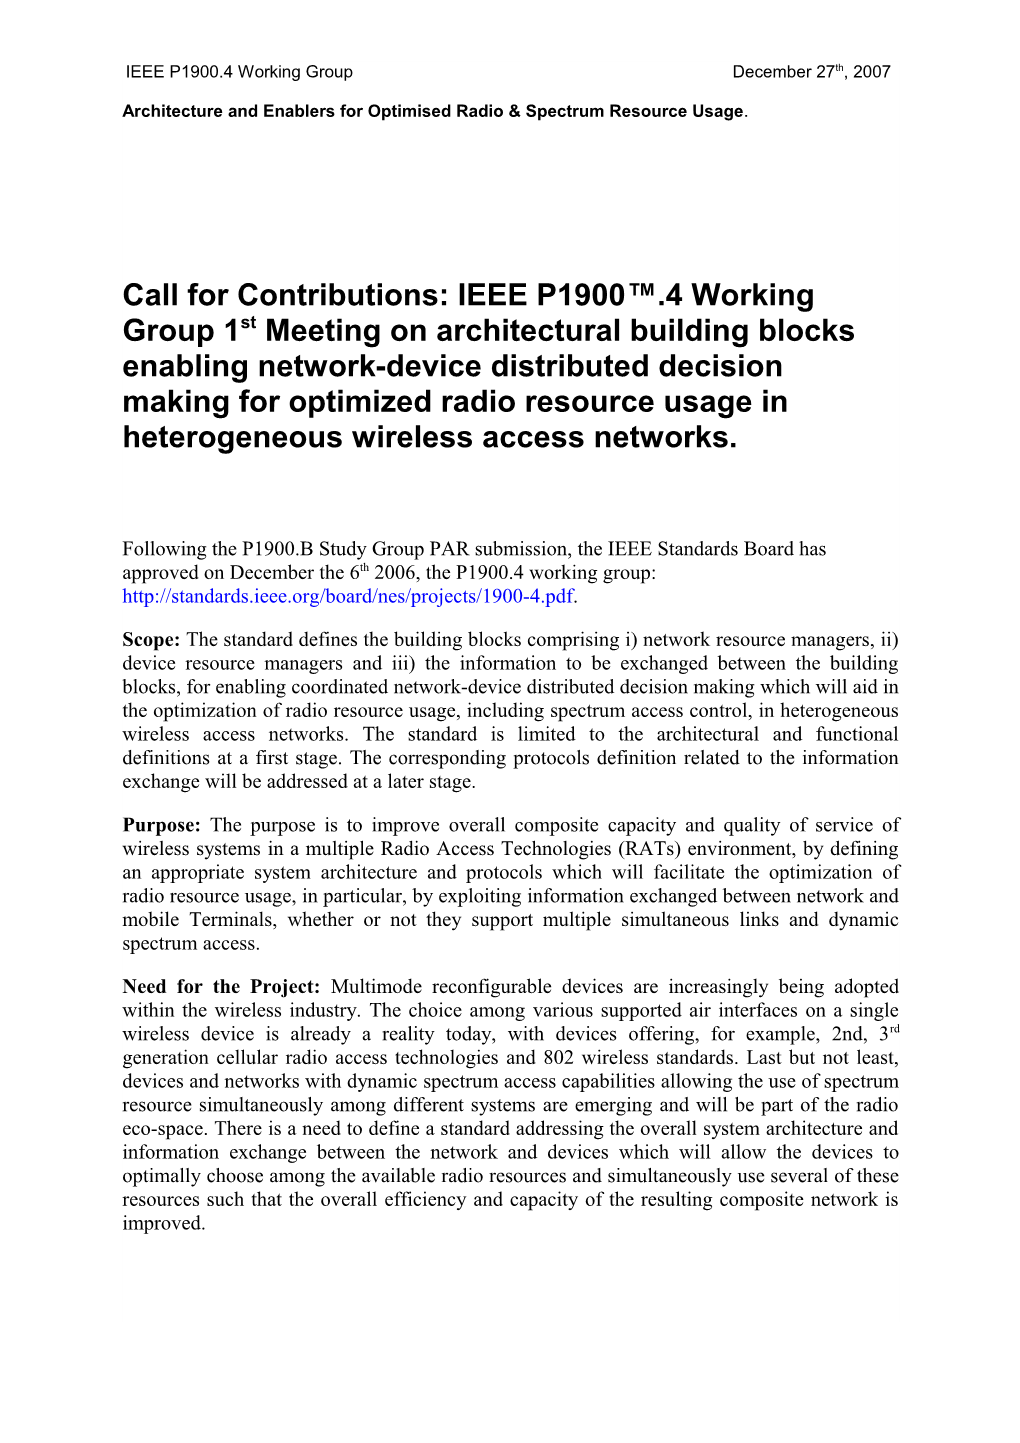 Architecture and Enablers for Optimised Radio & Spectrum Resource Usage